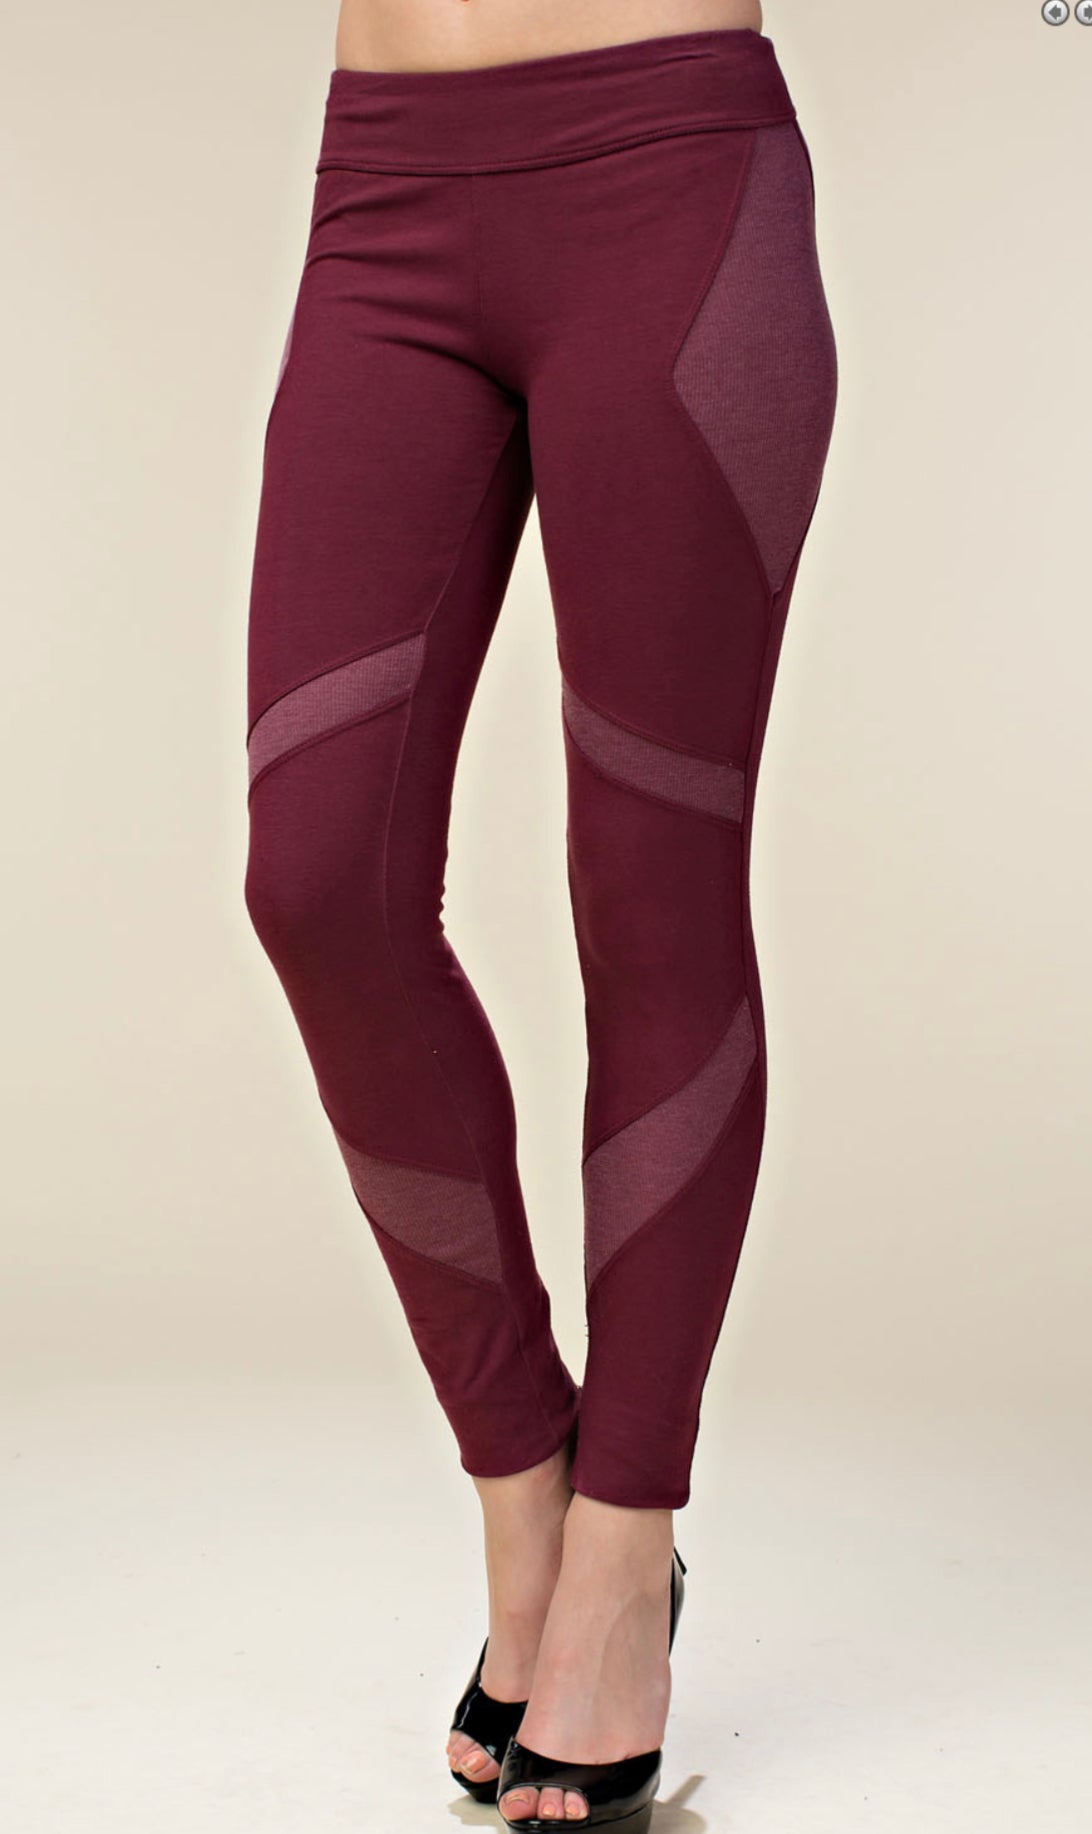 Shop the Latest Collection of Maroon Tights